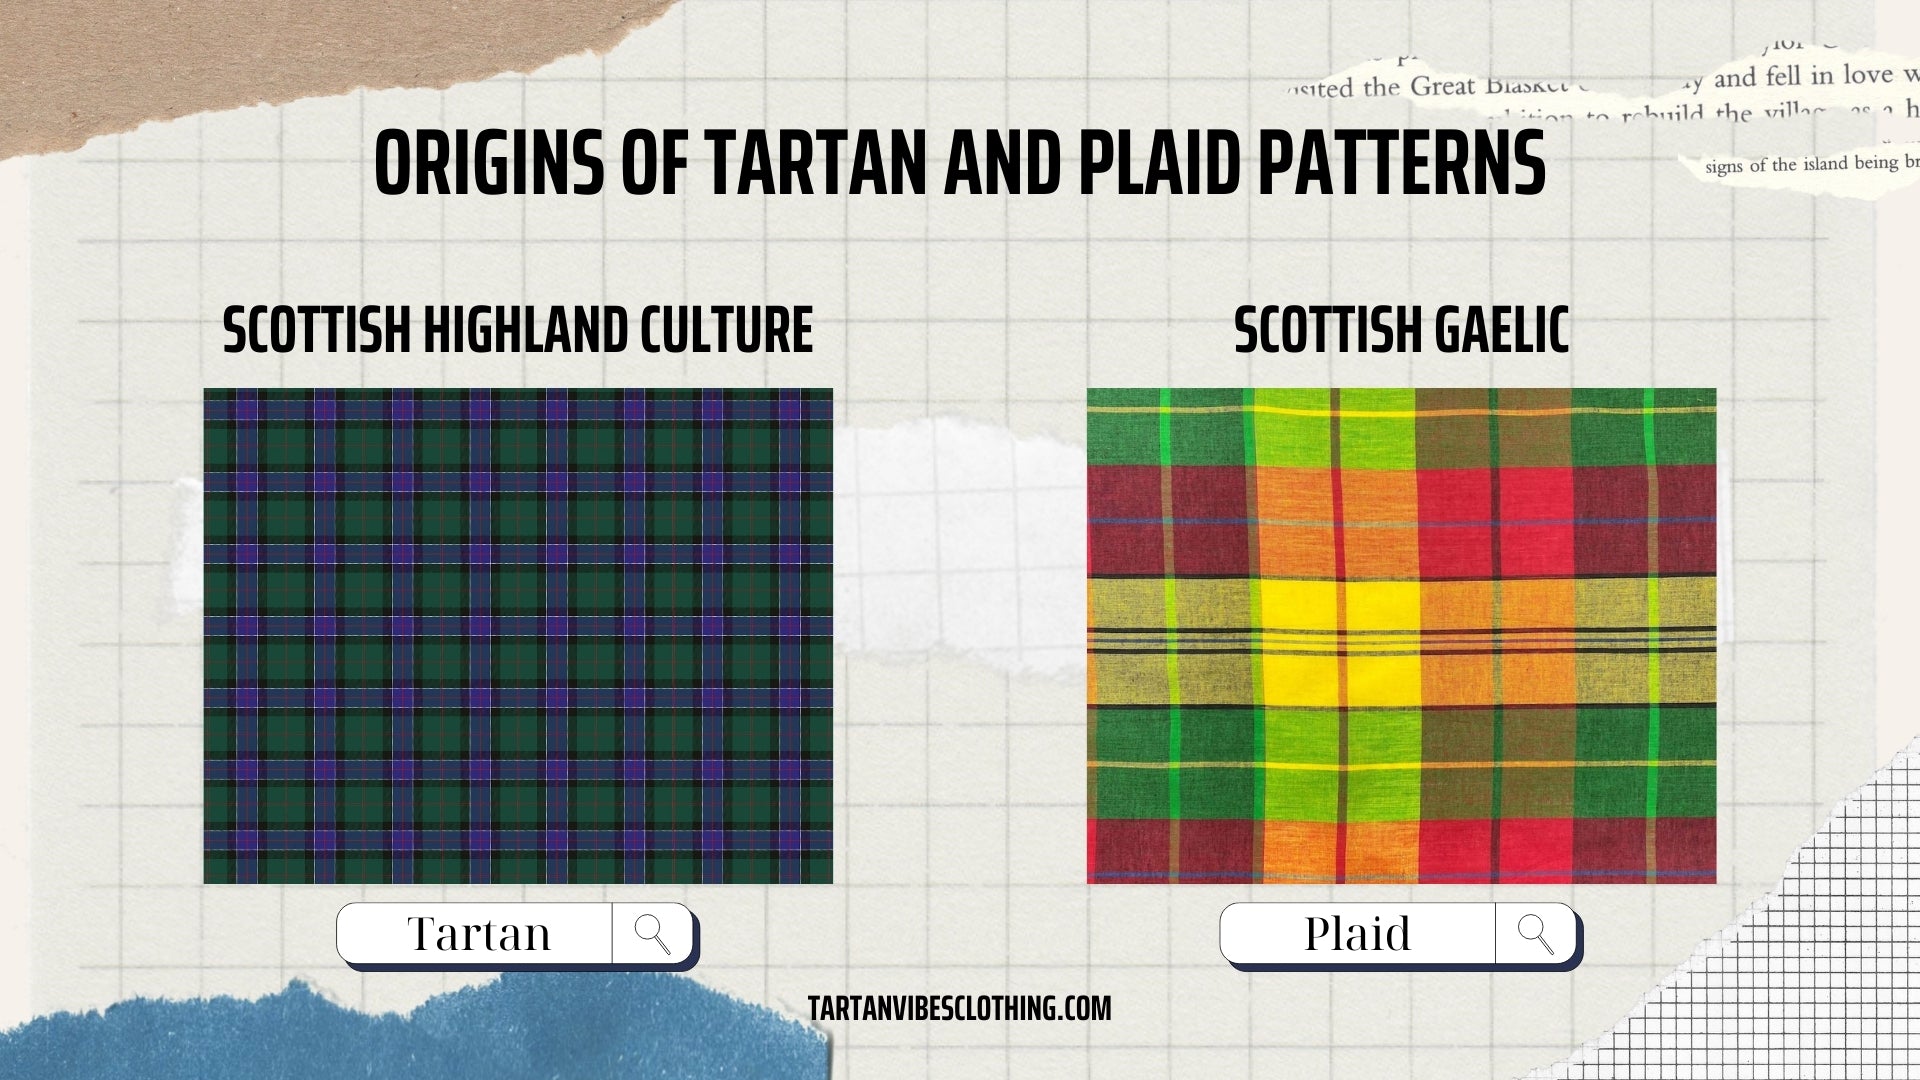 Differences in the origins and histories of tartan and plaid patterns